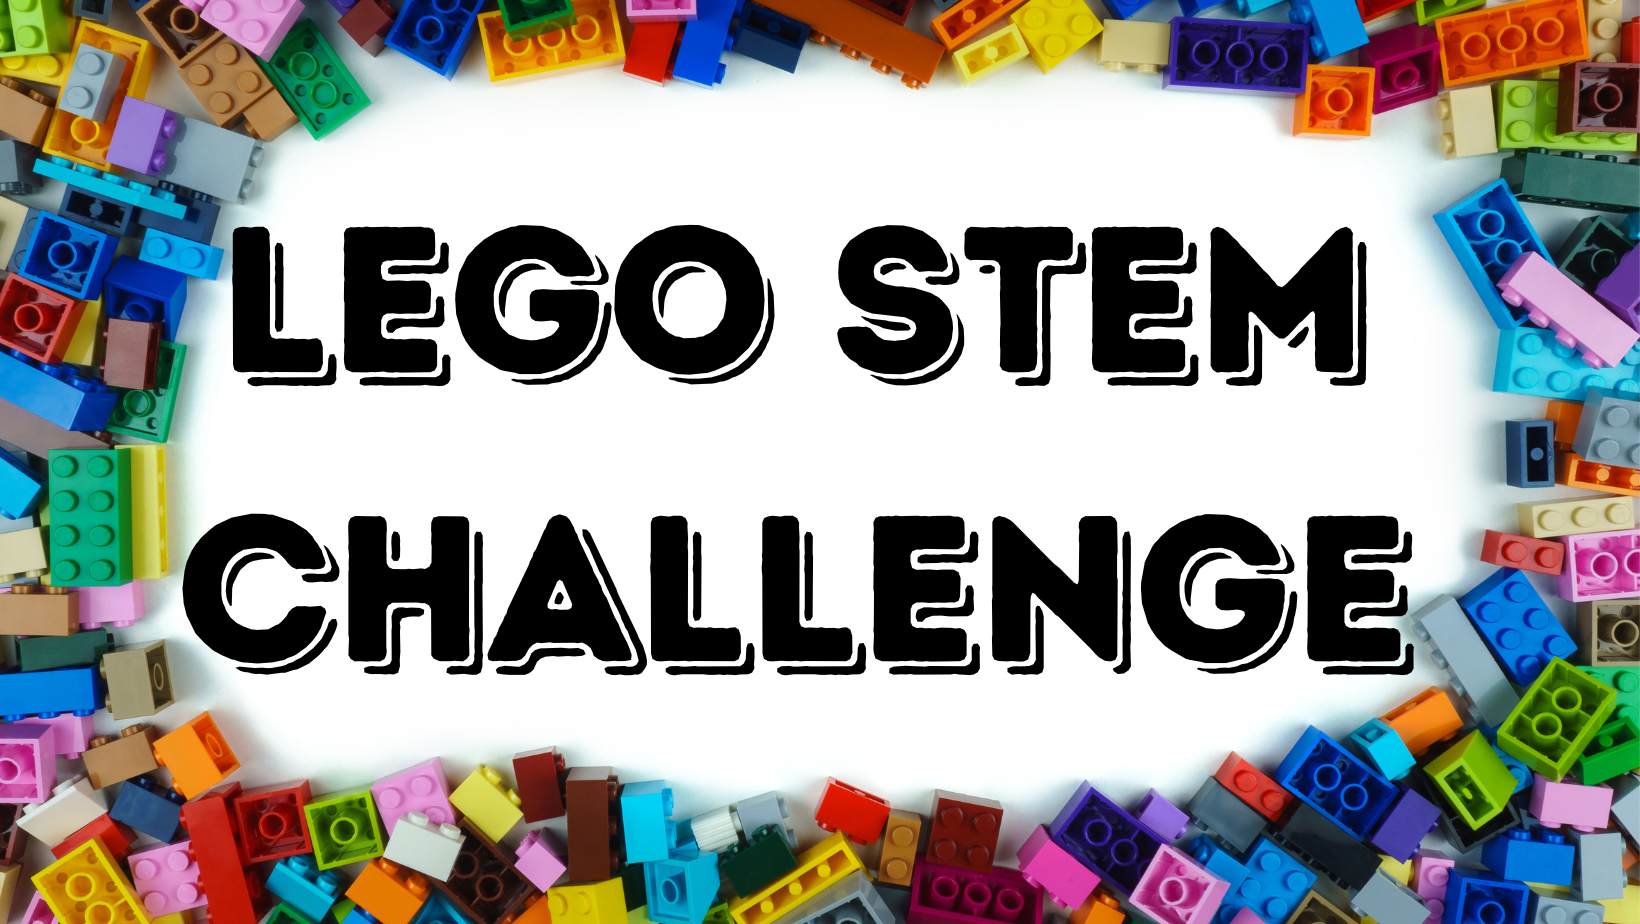 LEGO STEM Challenge text surrounded by colorful legos